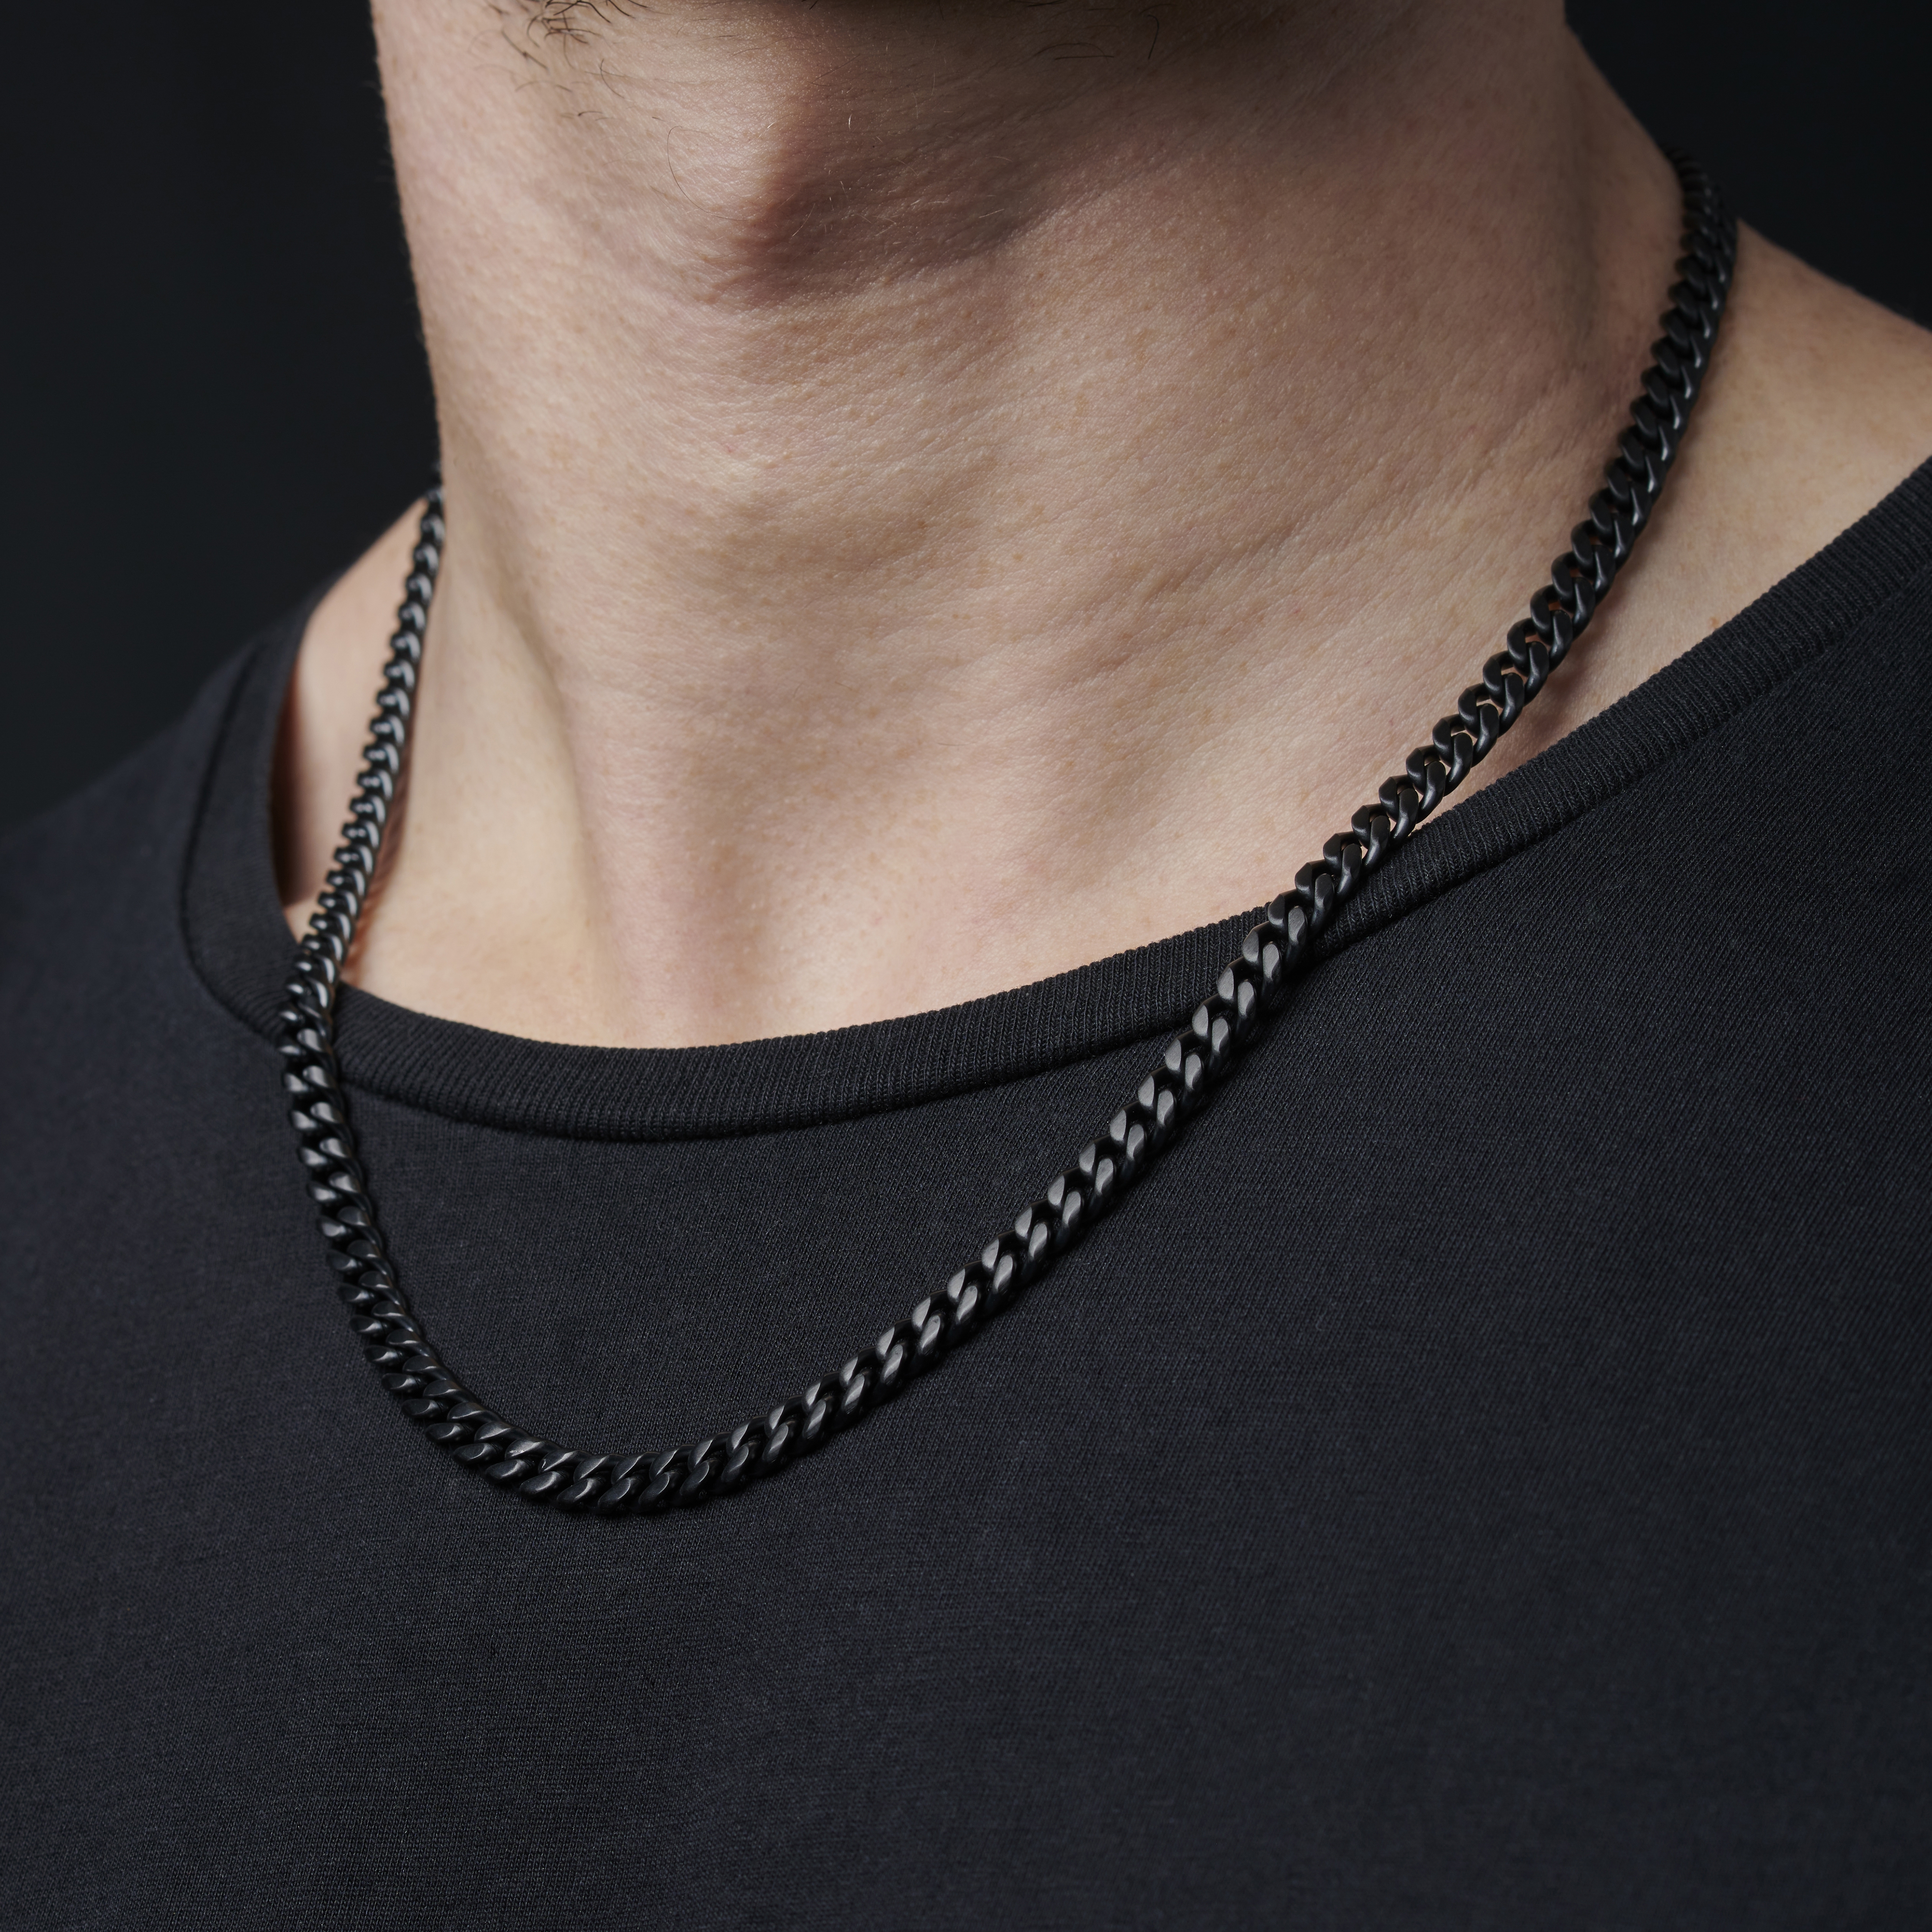 Black Stainless Steel Dog Tag Ball Chain Necklace